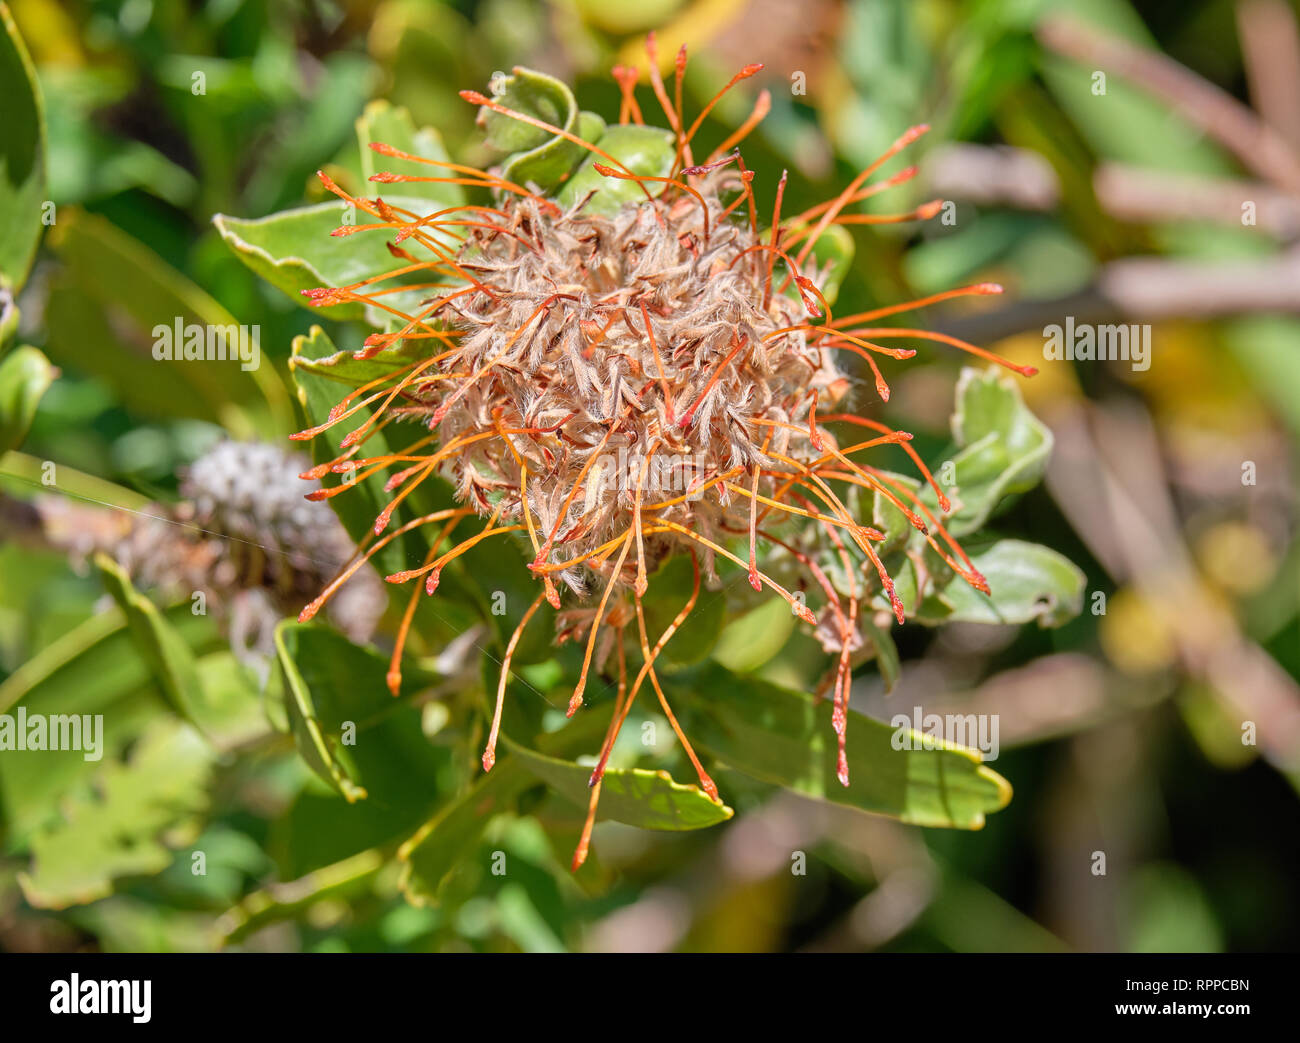 Close up of Yellow pincushion flower wilting and faded, of the protea family. Stock Photo